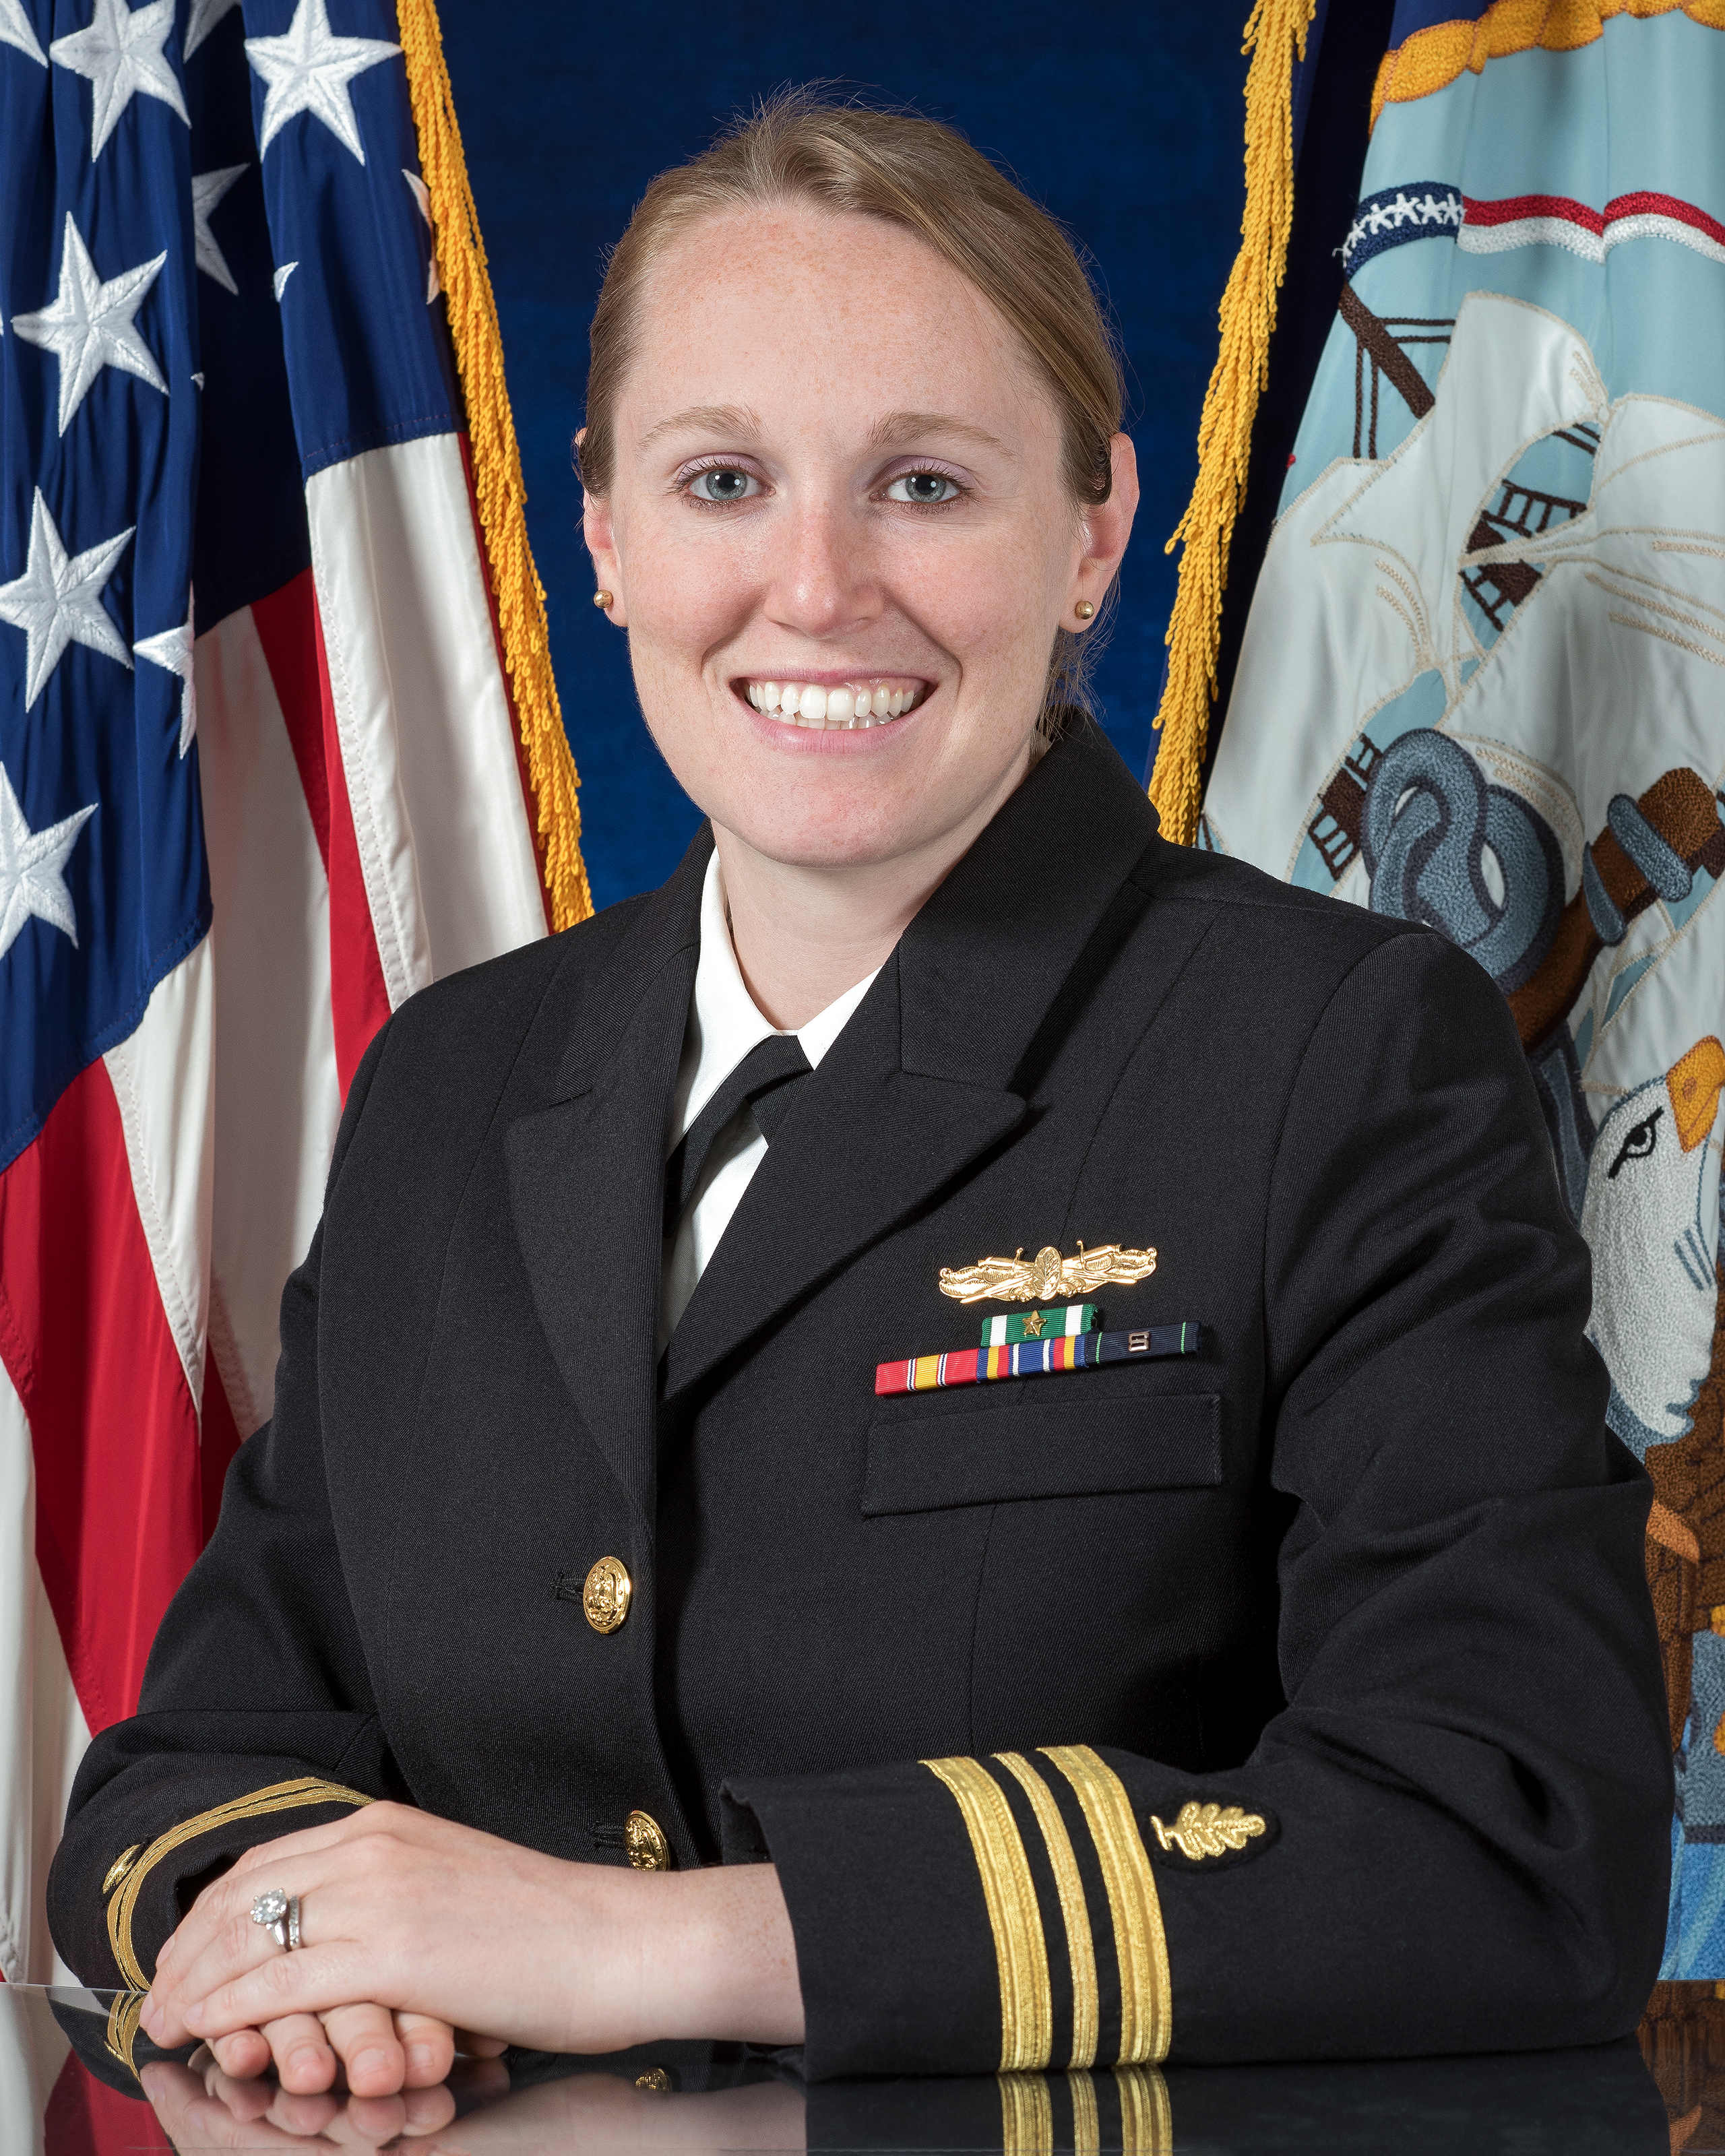 LCDR Condon